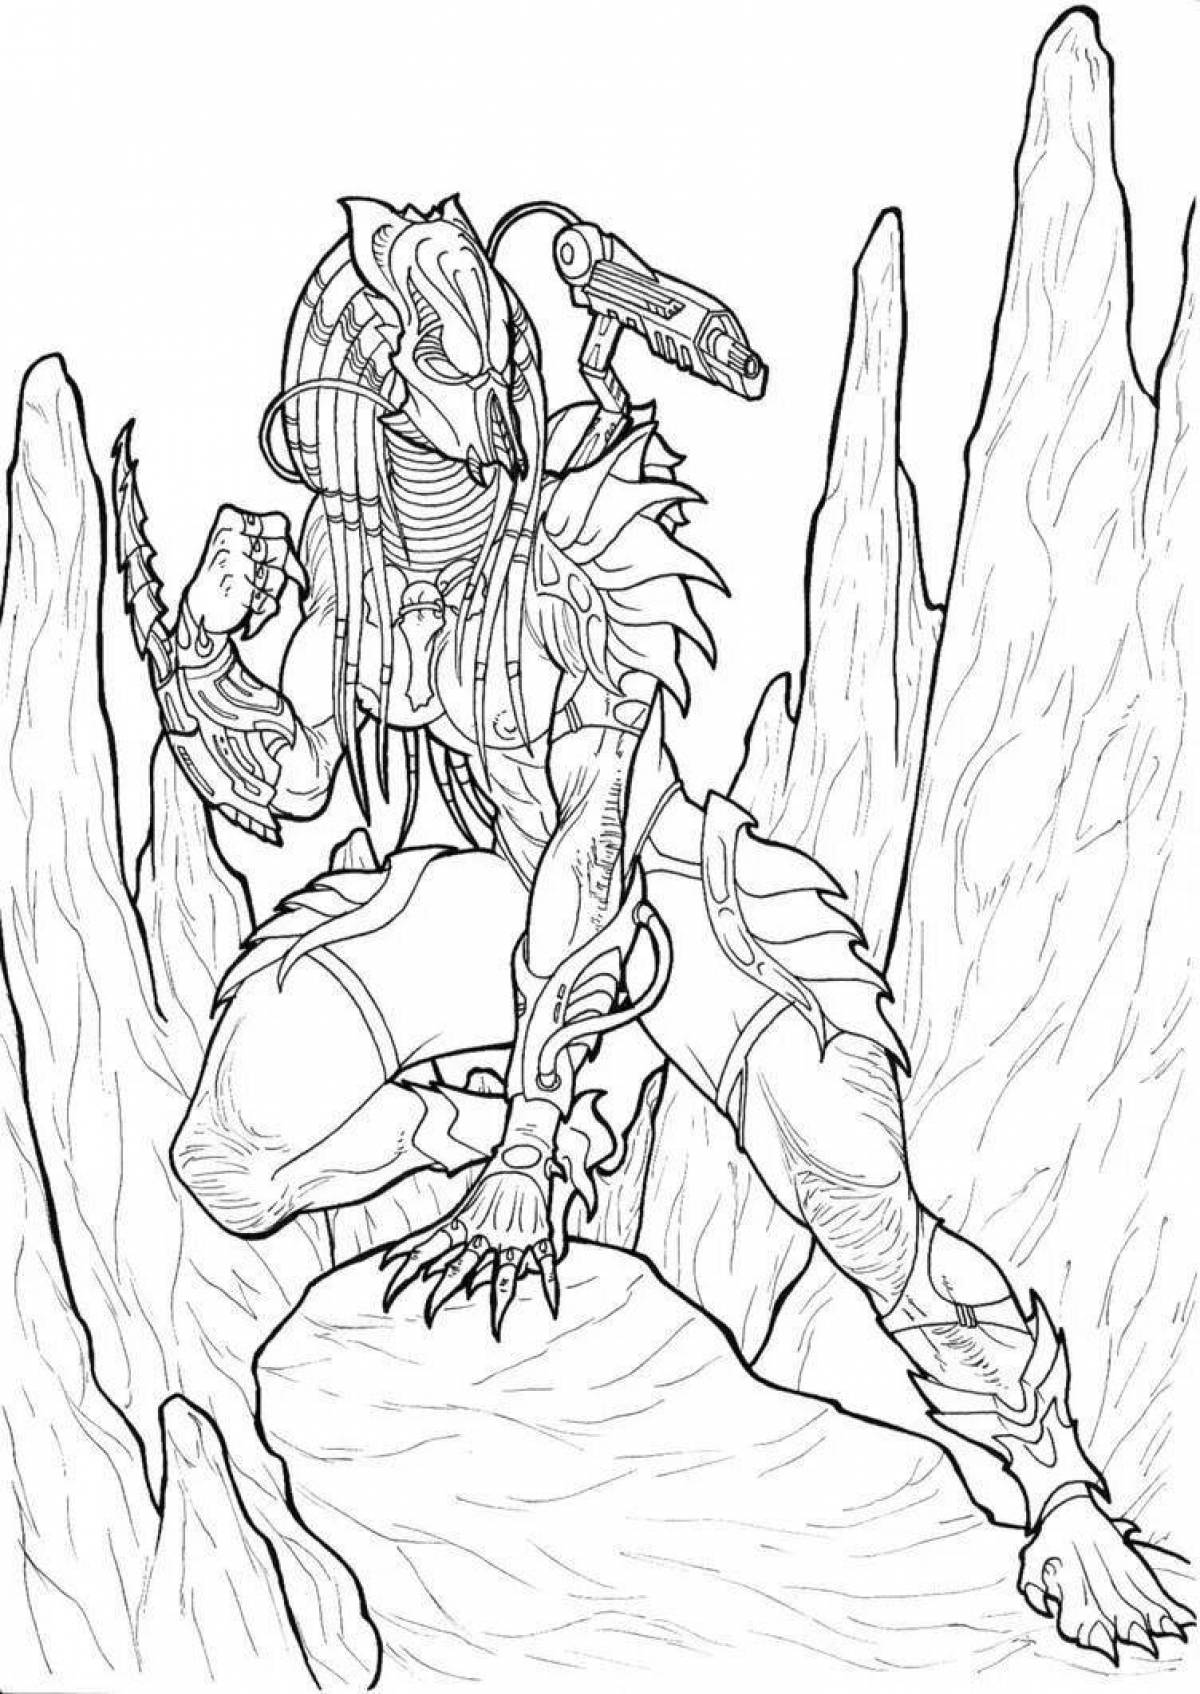 Alien and predator coloring page